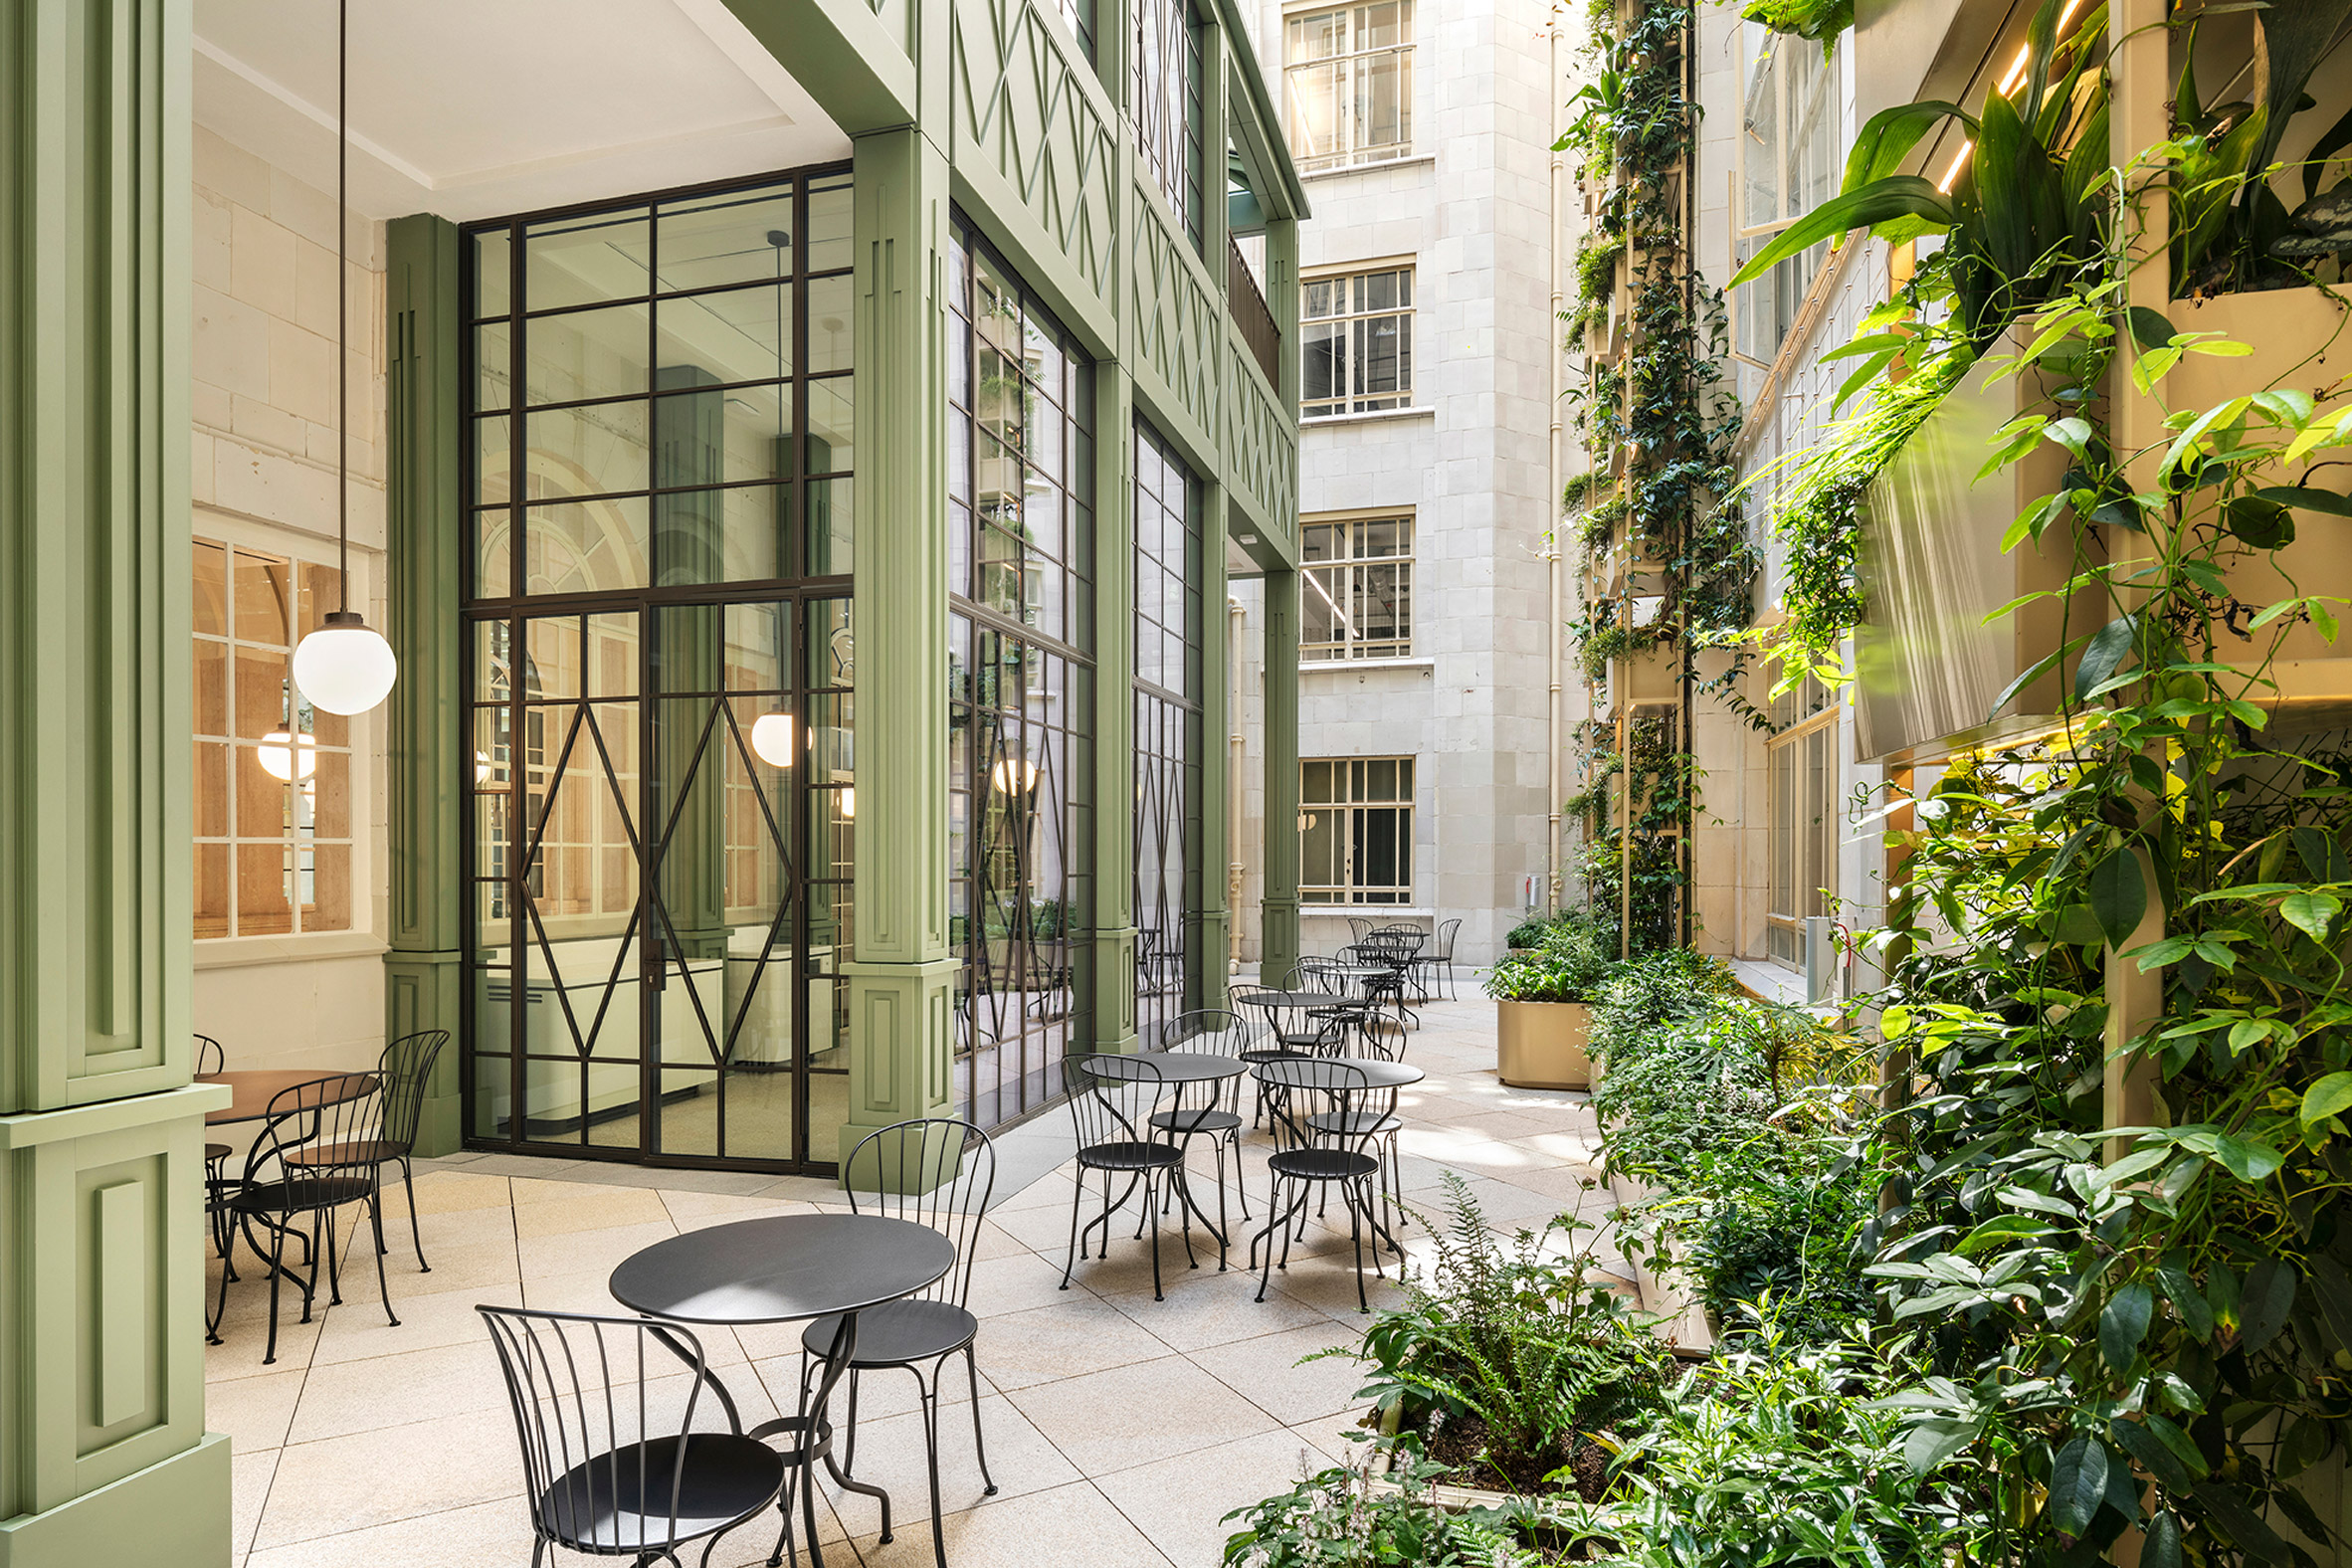 Image of a courtyard at 80 the Strand